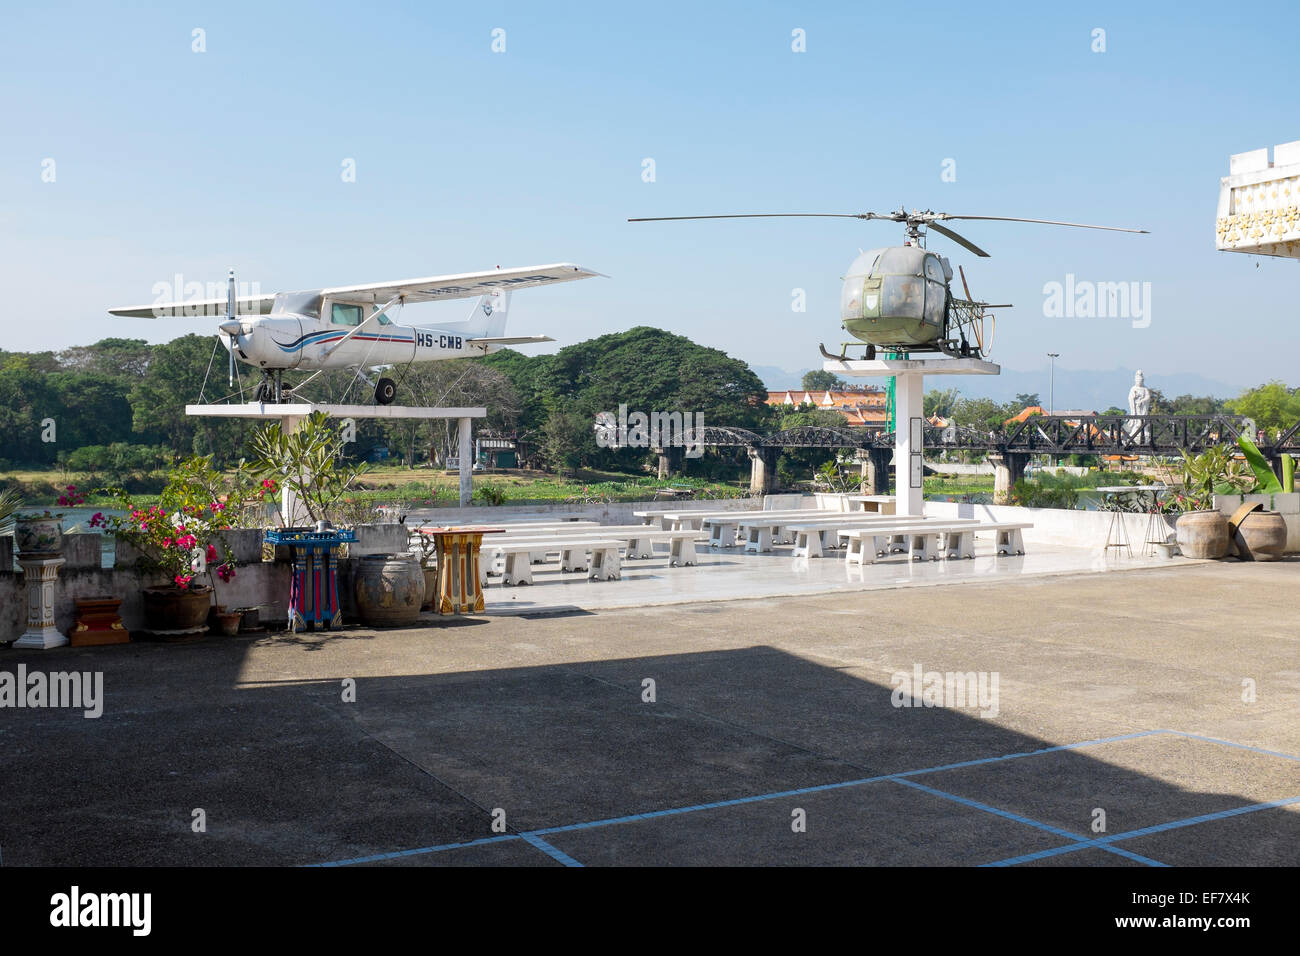 Airplane and Helicopter on Display at War Museum in Kanchanaburi Thailand Stock Photo